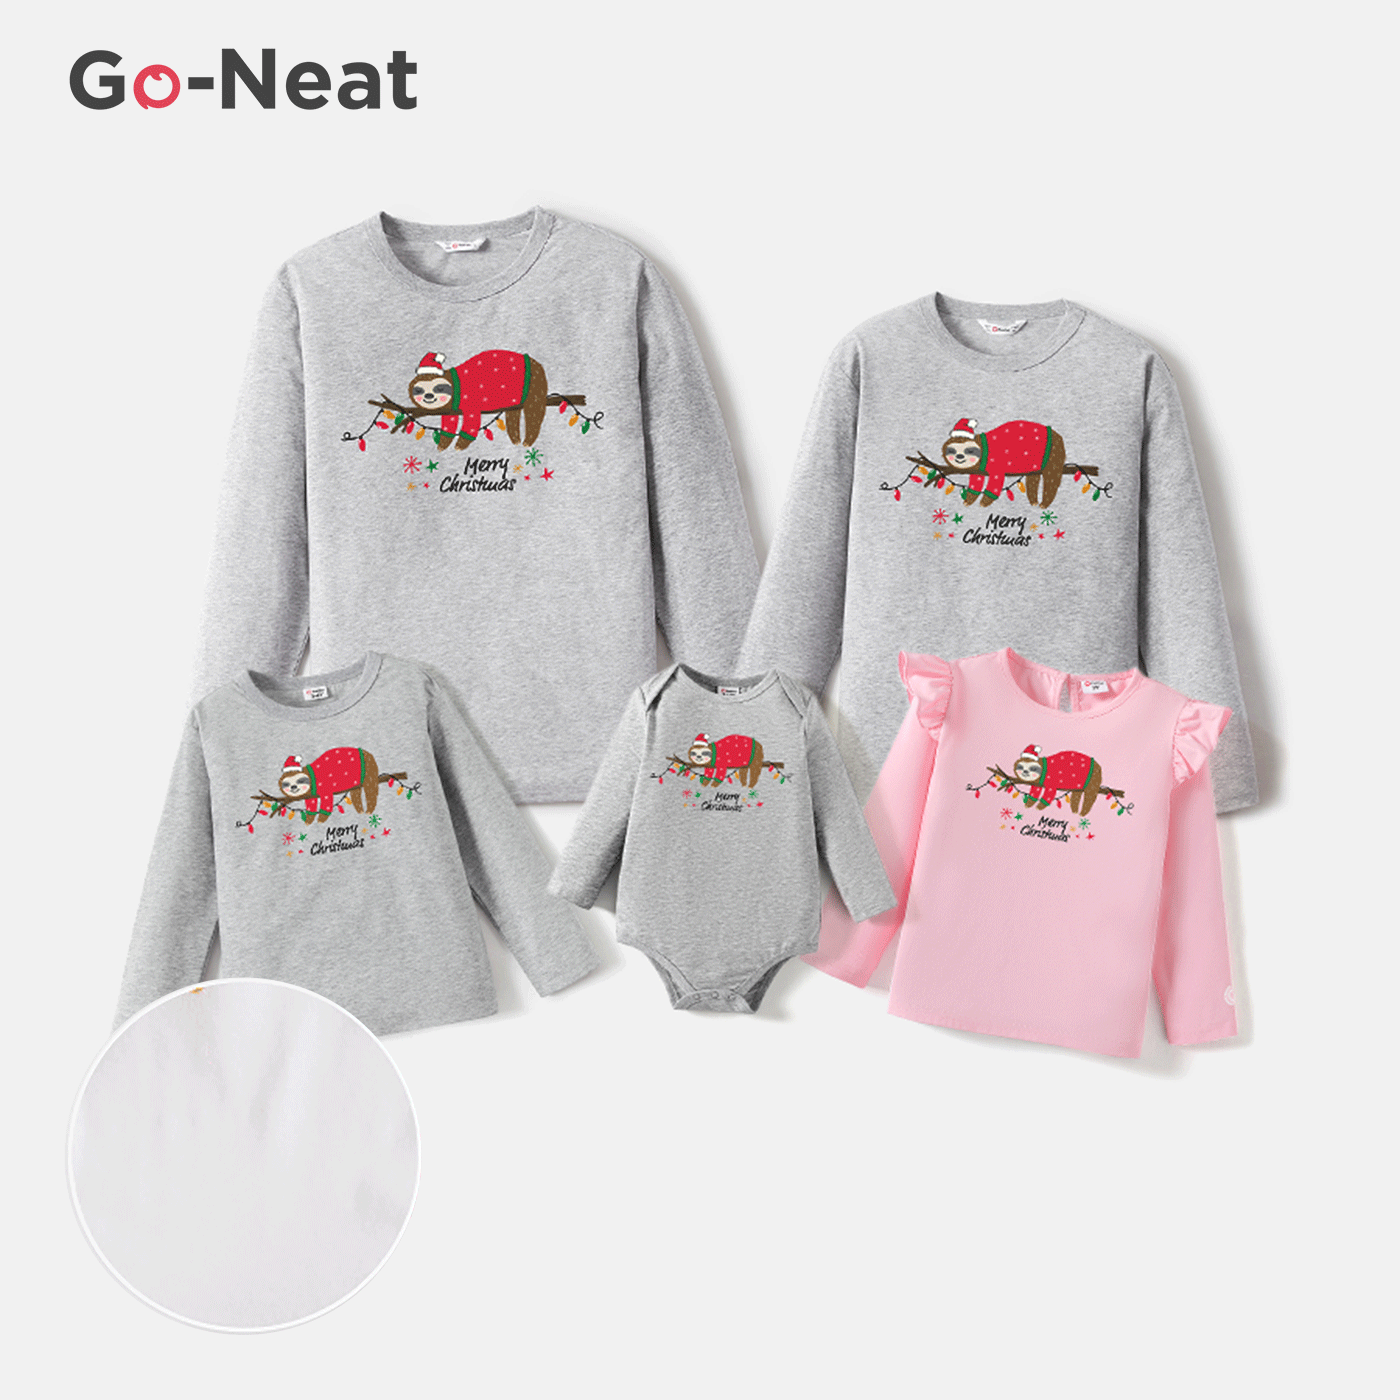 Go-Neat Water Repellent and Stain Resistant Family Matching Christmas Sloth & Letter Print Long-sleeve Tee